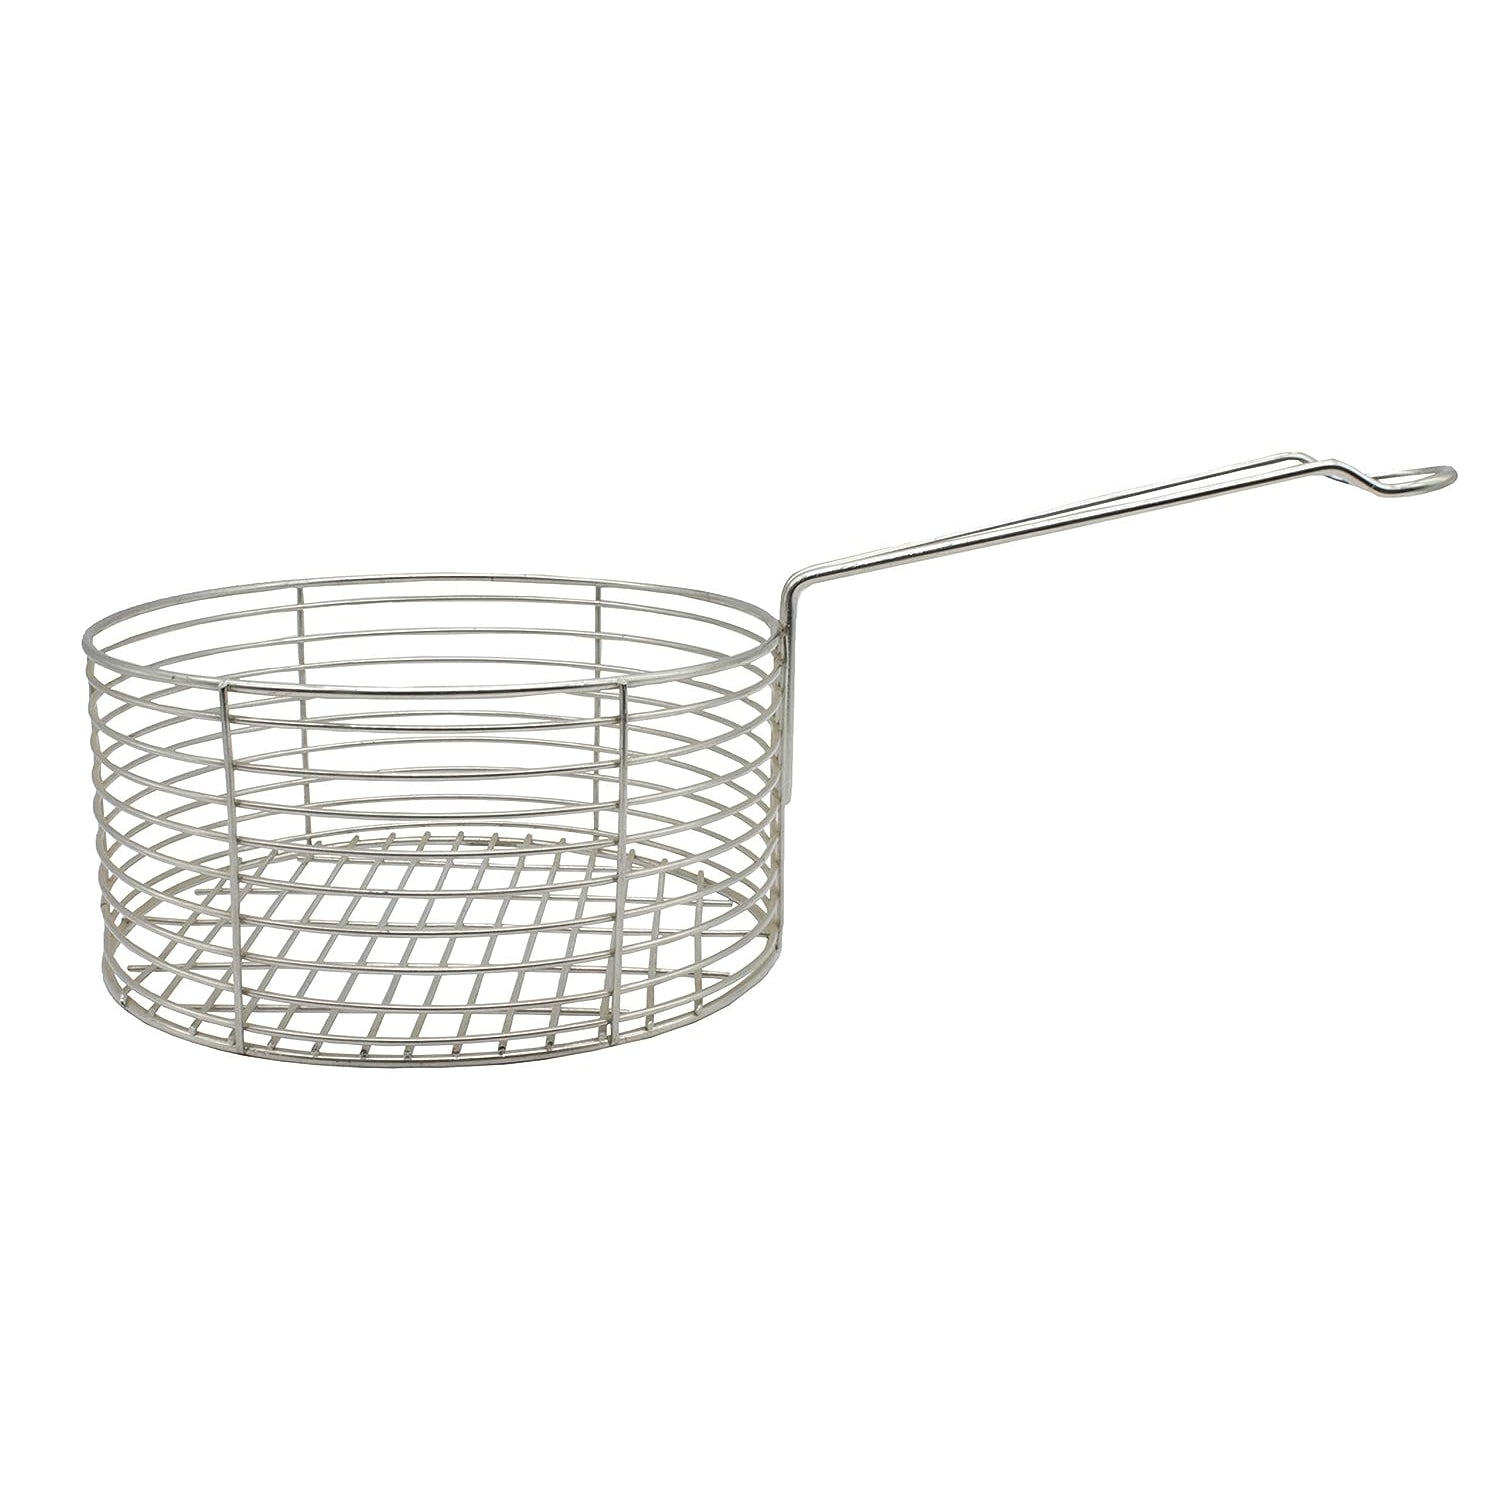 Chip Frying Stainless Steel Basket 18 cm